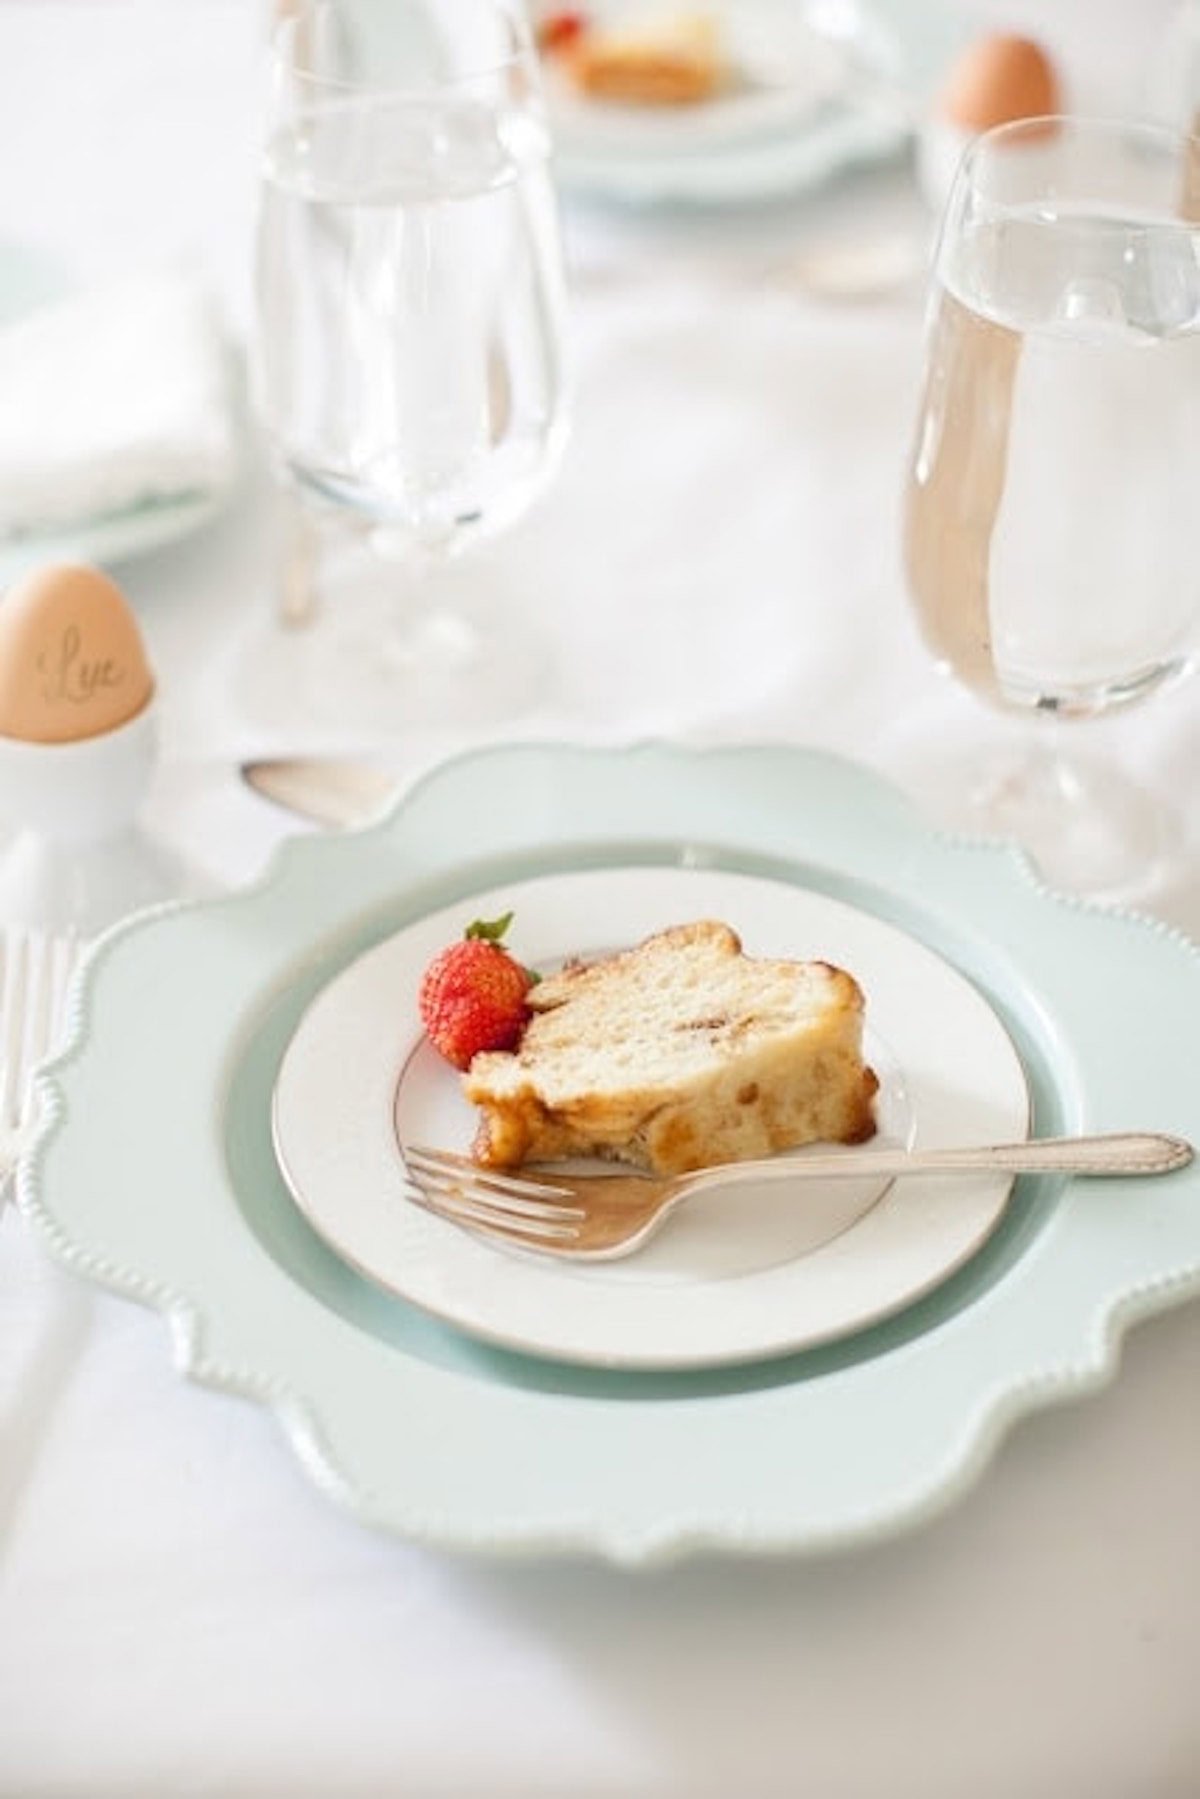 Slice of cake with a strawberry and a fork on a white plate, placed on a larger light blue plate; water glasses, soft-boiled egg in an egg cup, and overnight monkey bread are in the background on a white tablecloth.